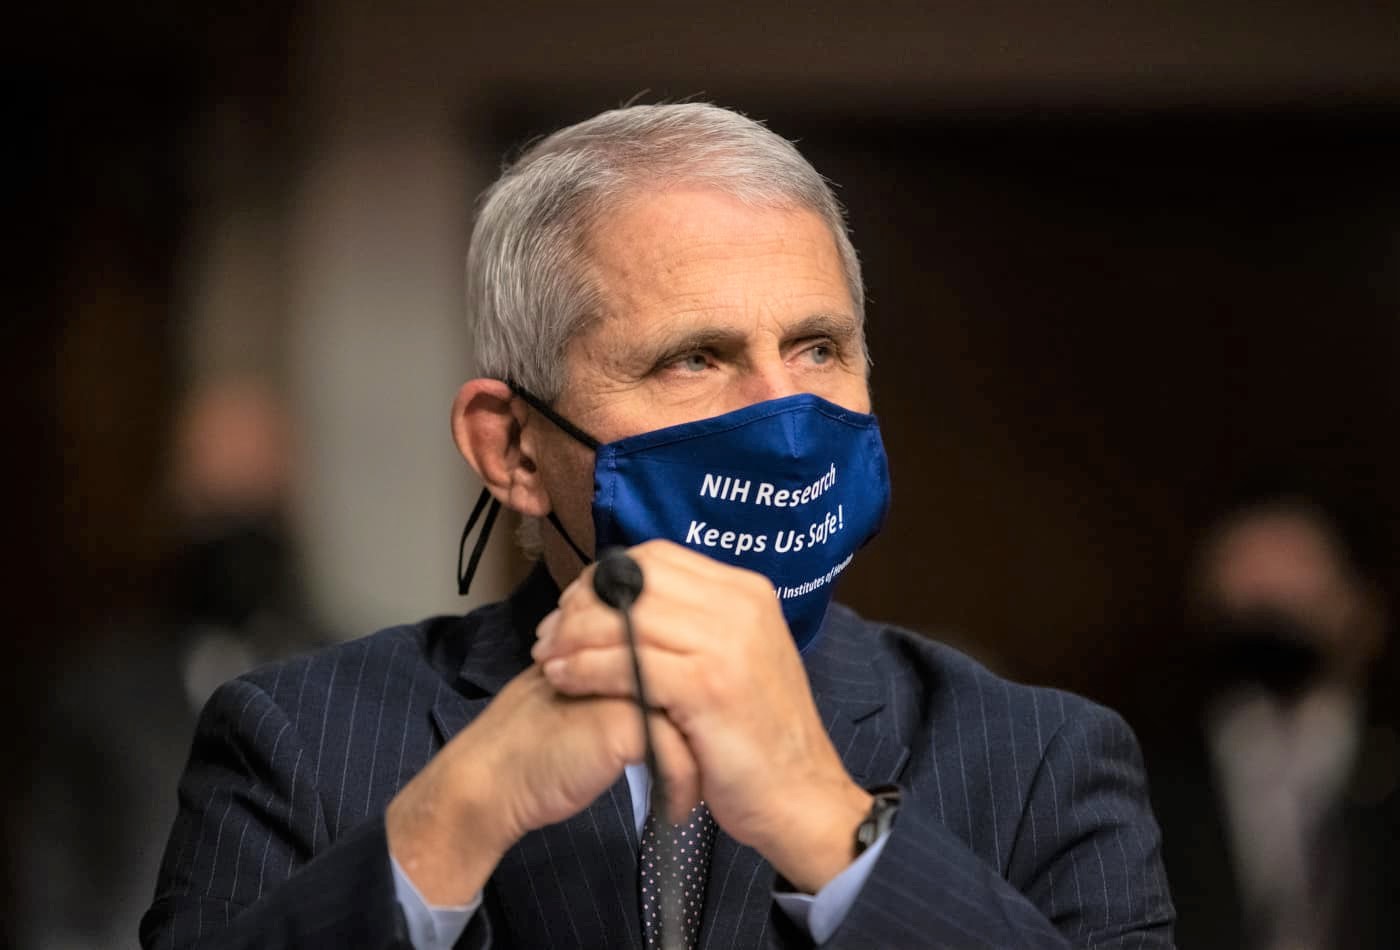 Anthony Fauci, director of the National Institute of Allergy and Infectious Diseases, sits ahead of a Senate Health Education Labor and Pensions Committee hearing in Washington, D.C., U.S., on Wednesday, Sept. 23, 2020